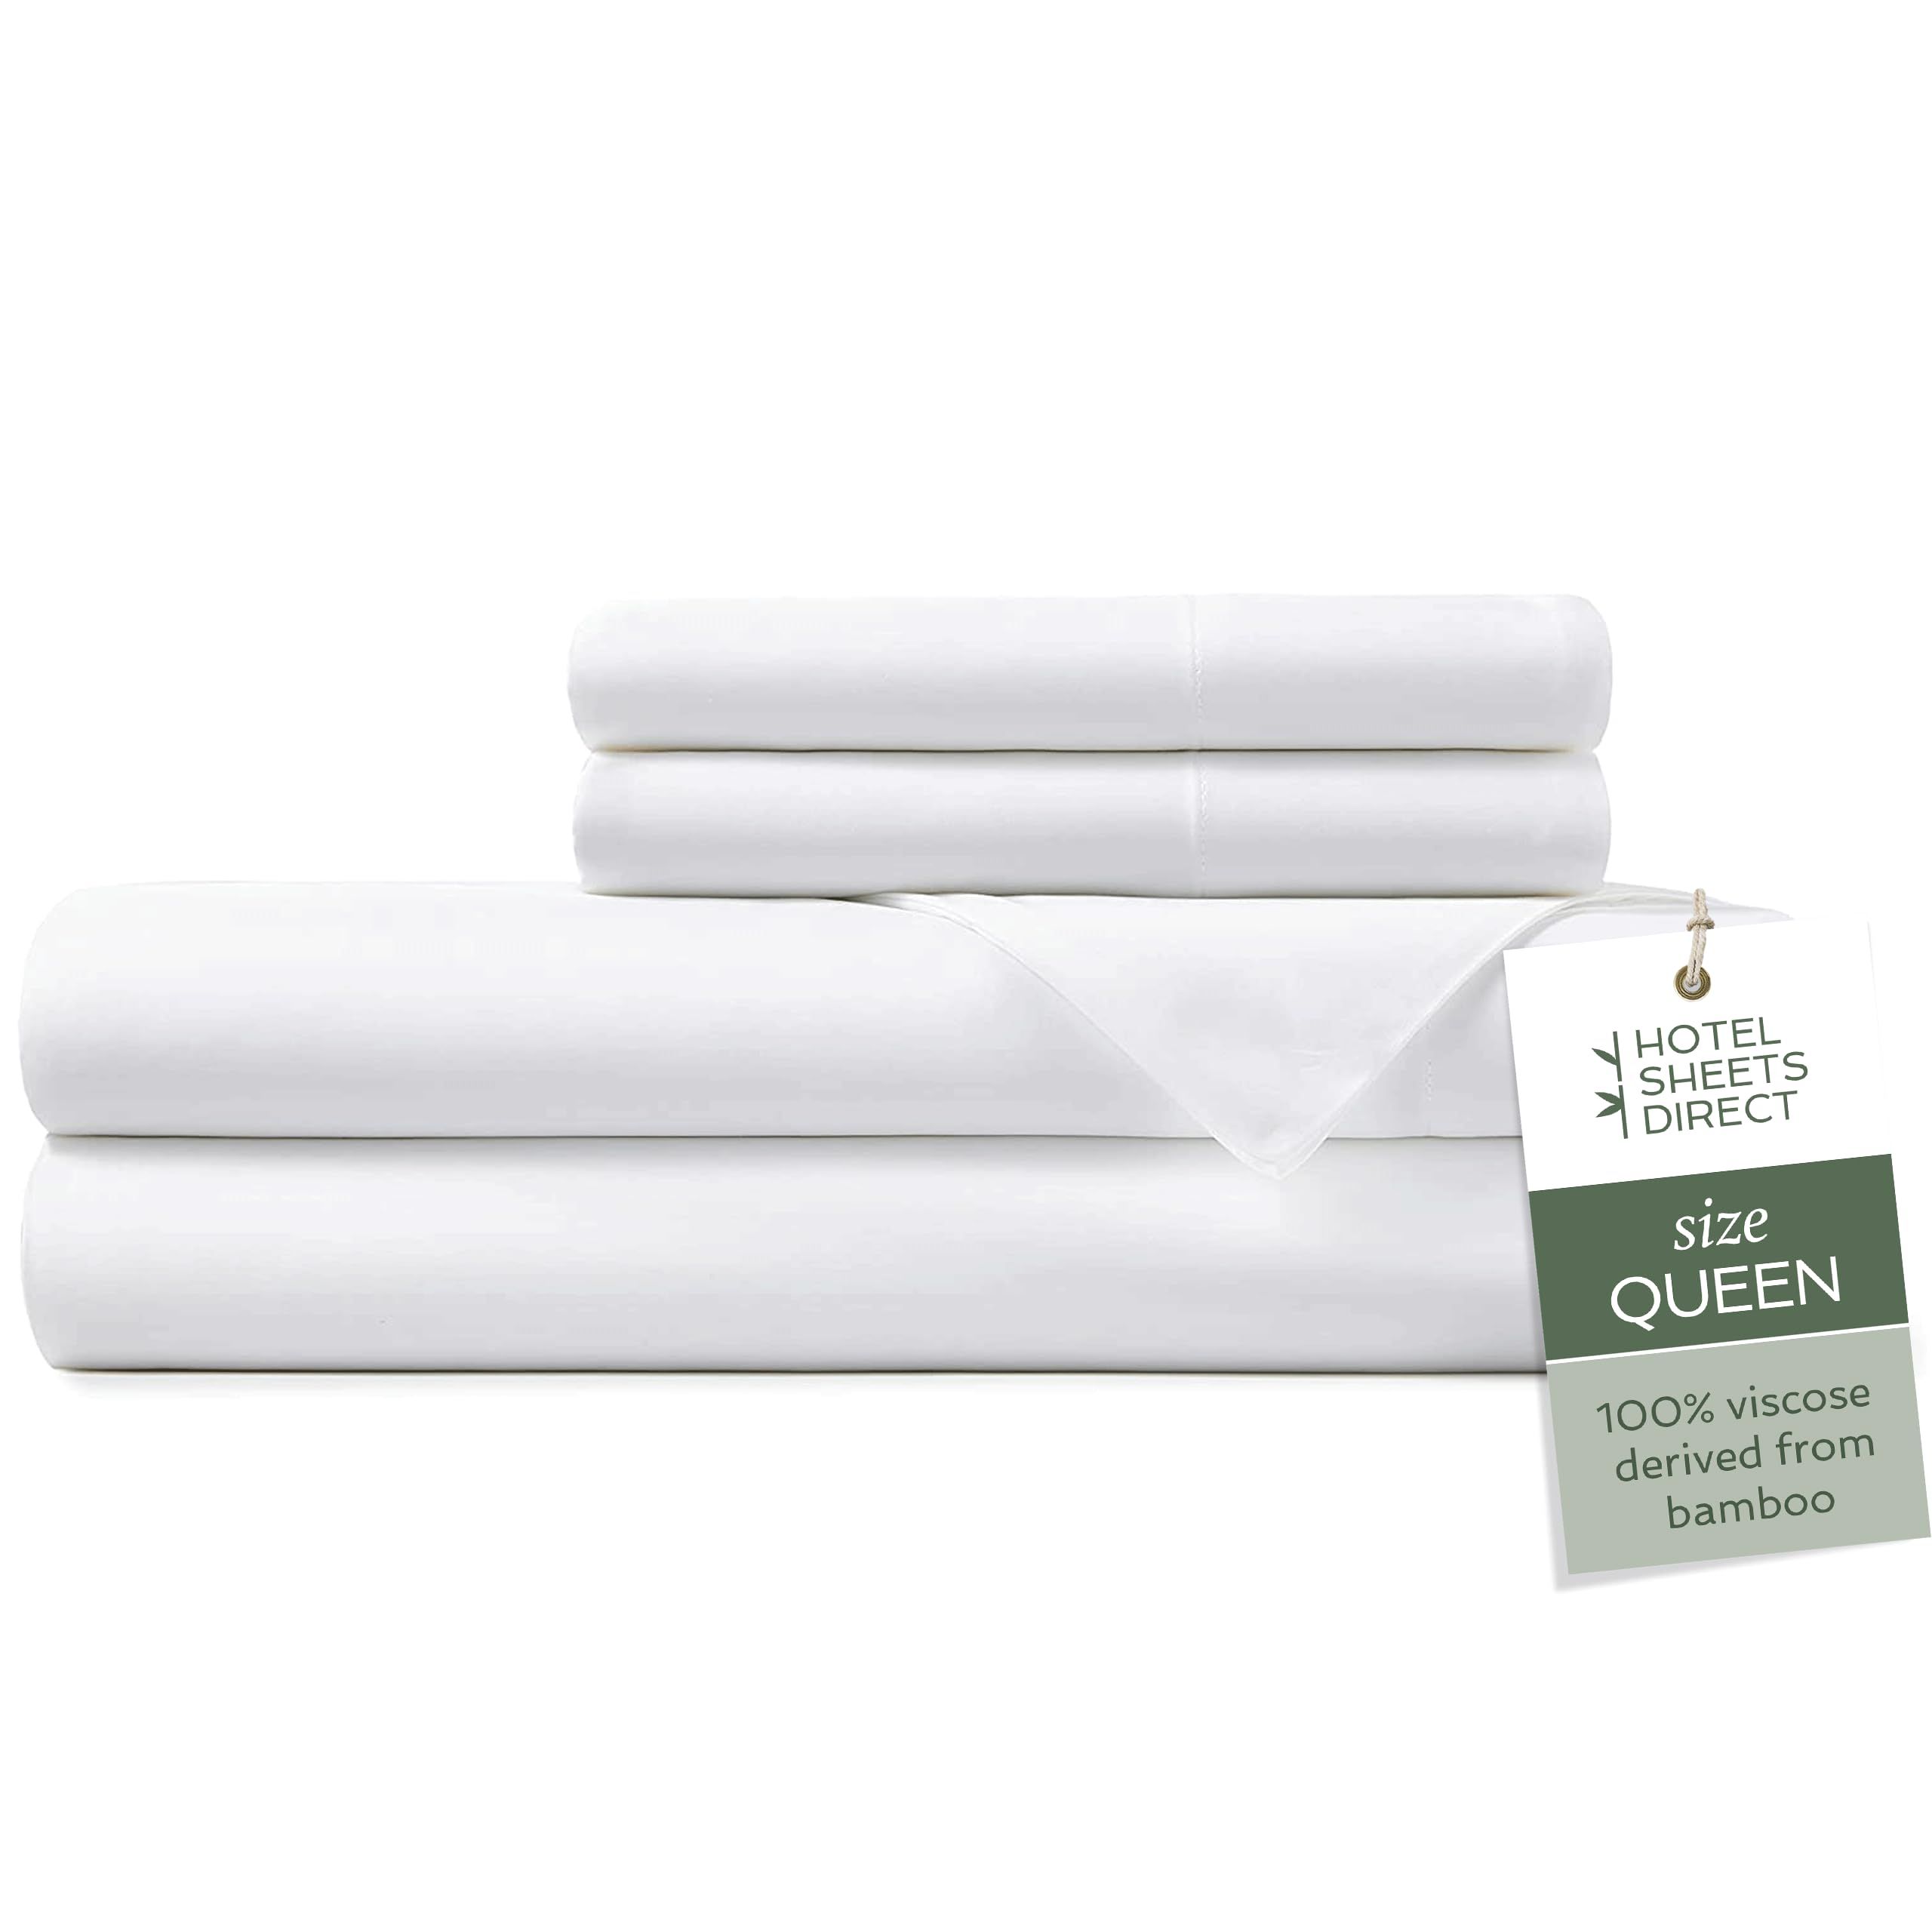 Hotel Sheets Direct 100% Viscose Derived from Bamboo Sheets Queen Size - Cooling Bed Sheets with ... | Amazon (US)